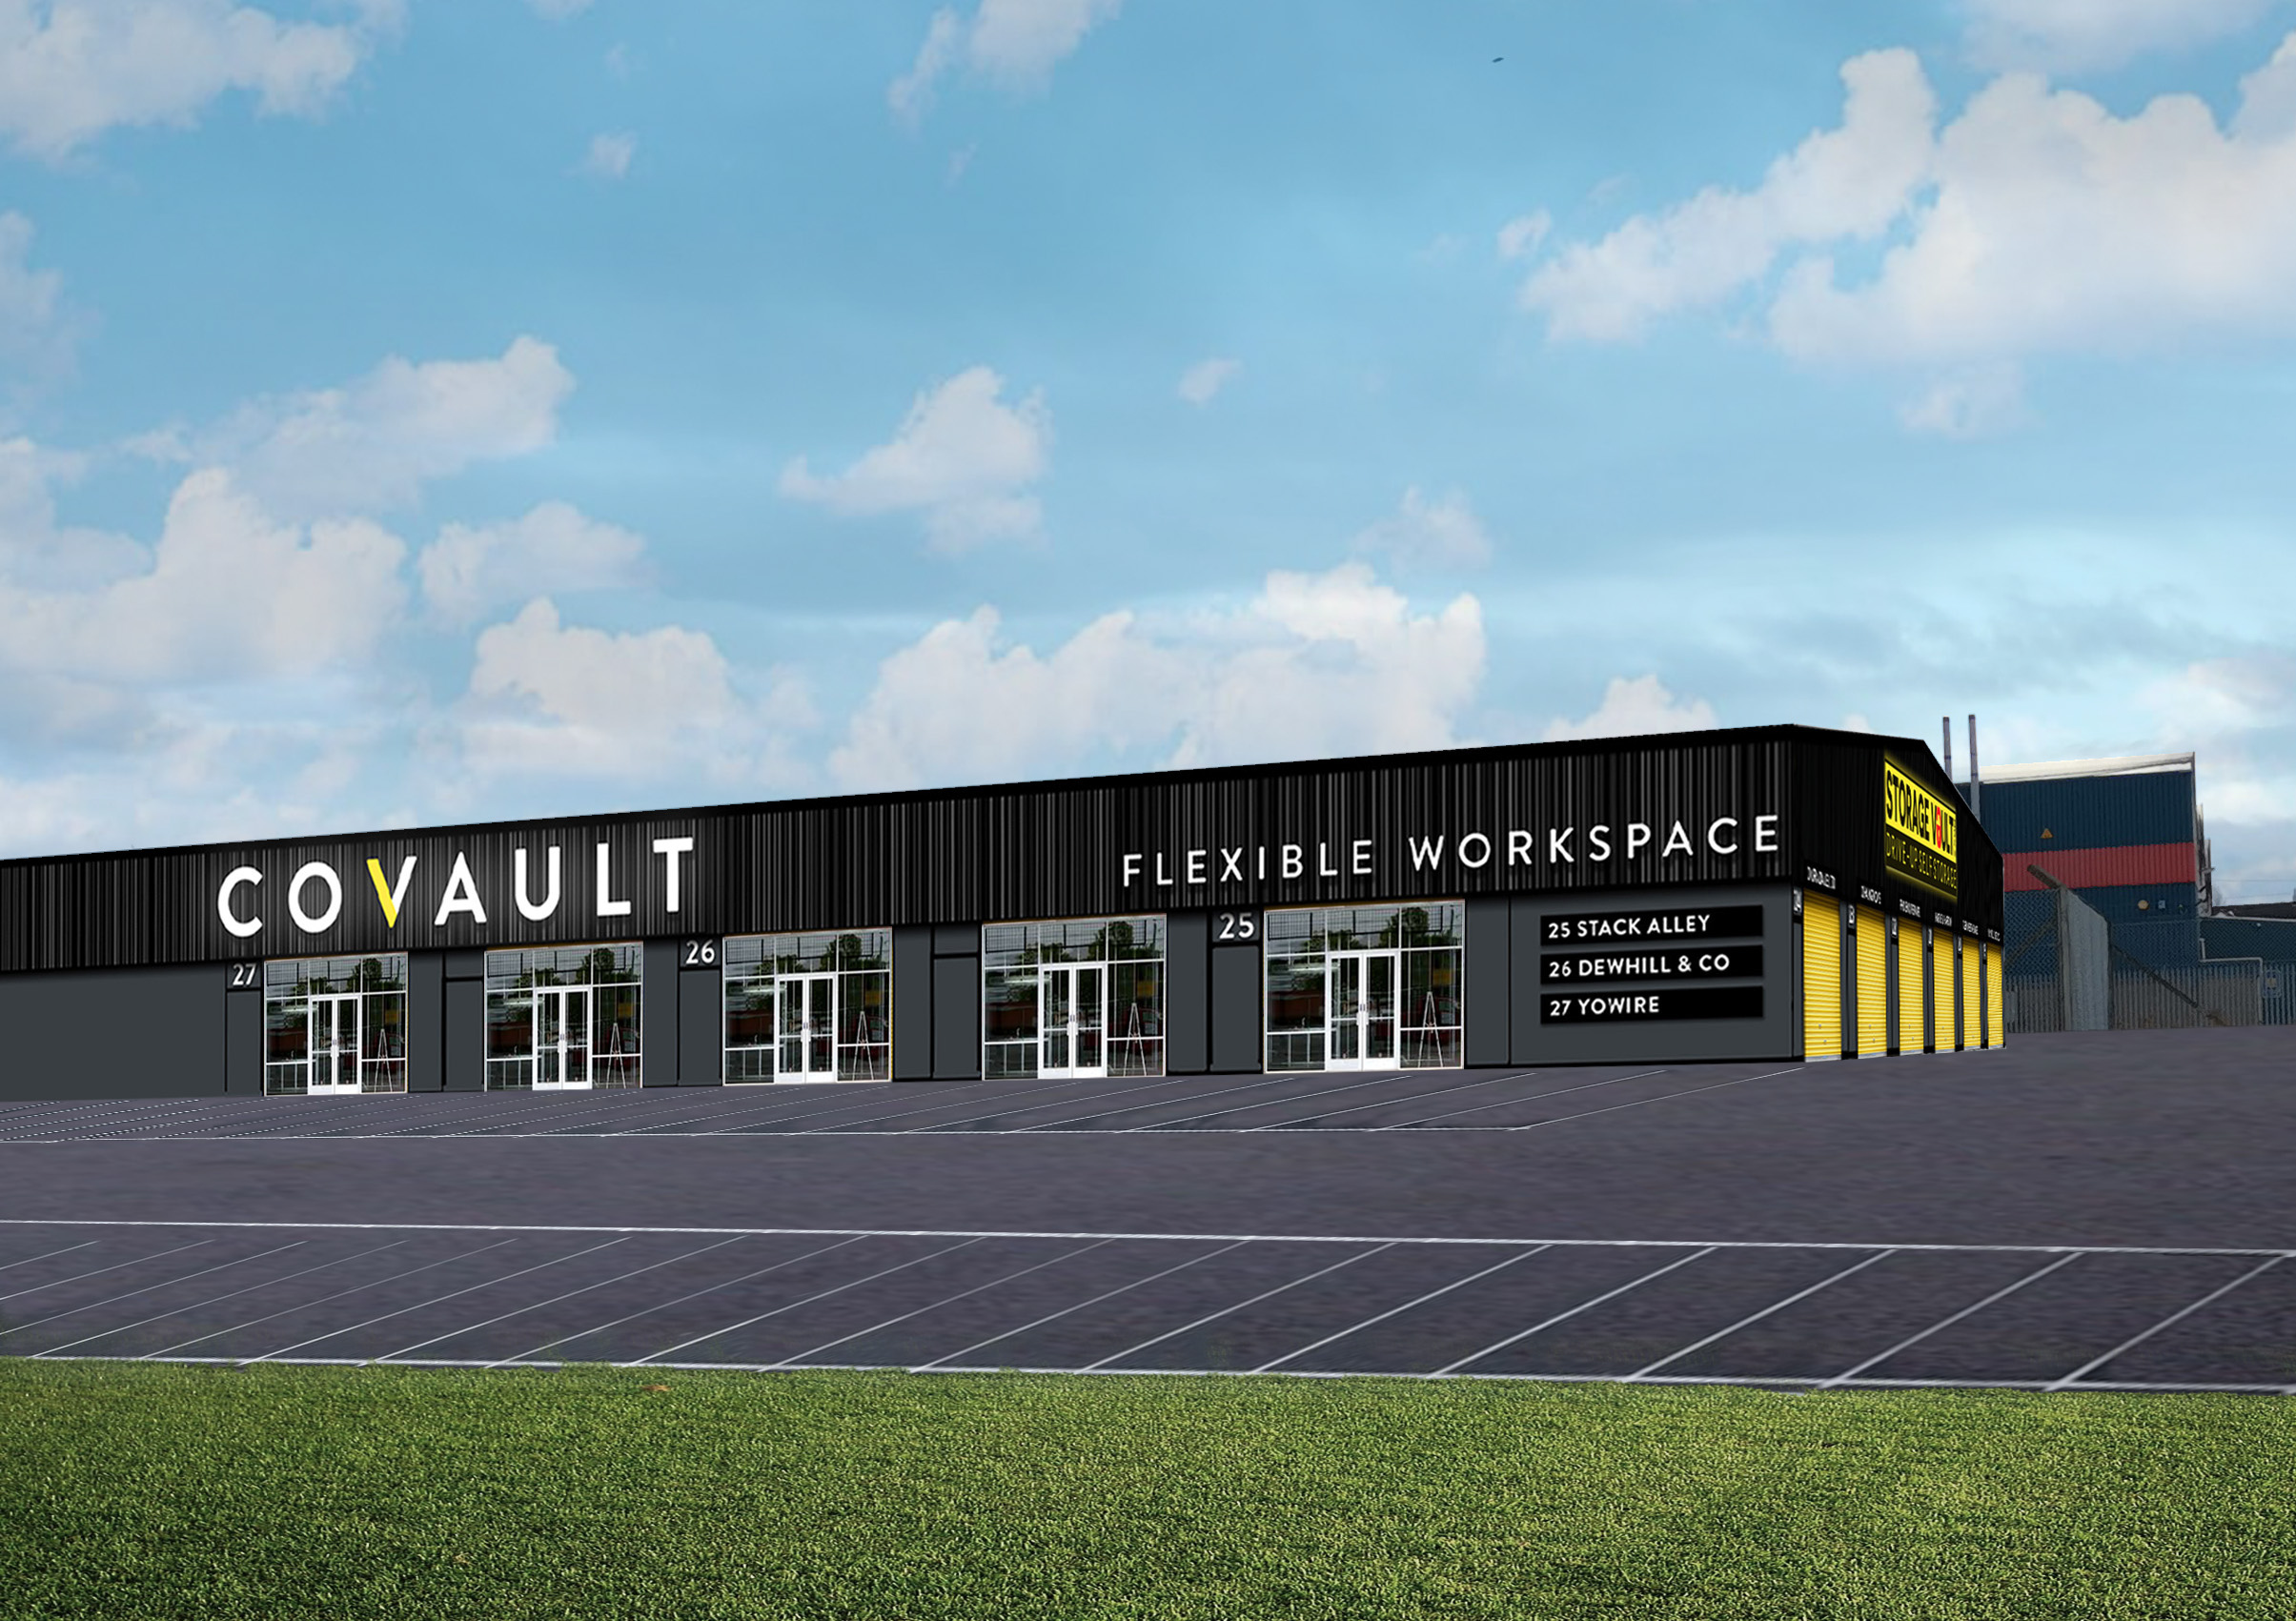 Light Industrial Units To Rent Dundee - CoVault Workspace